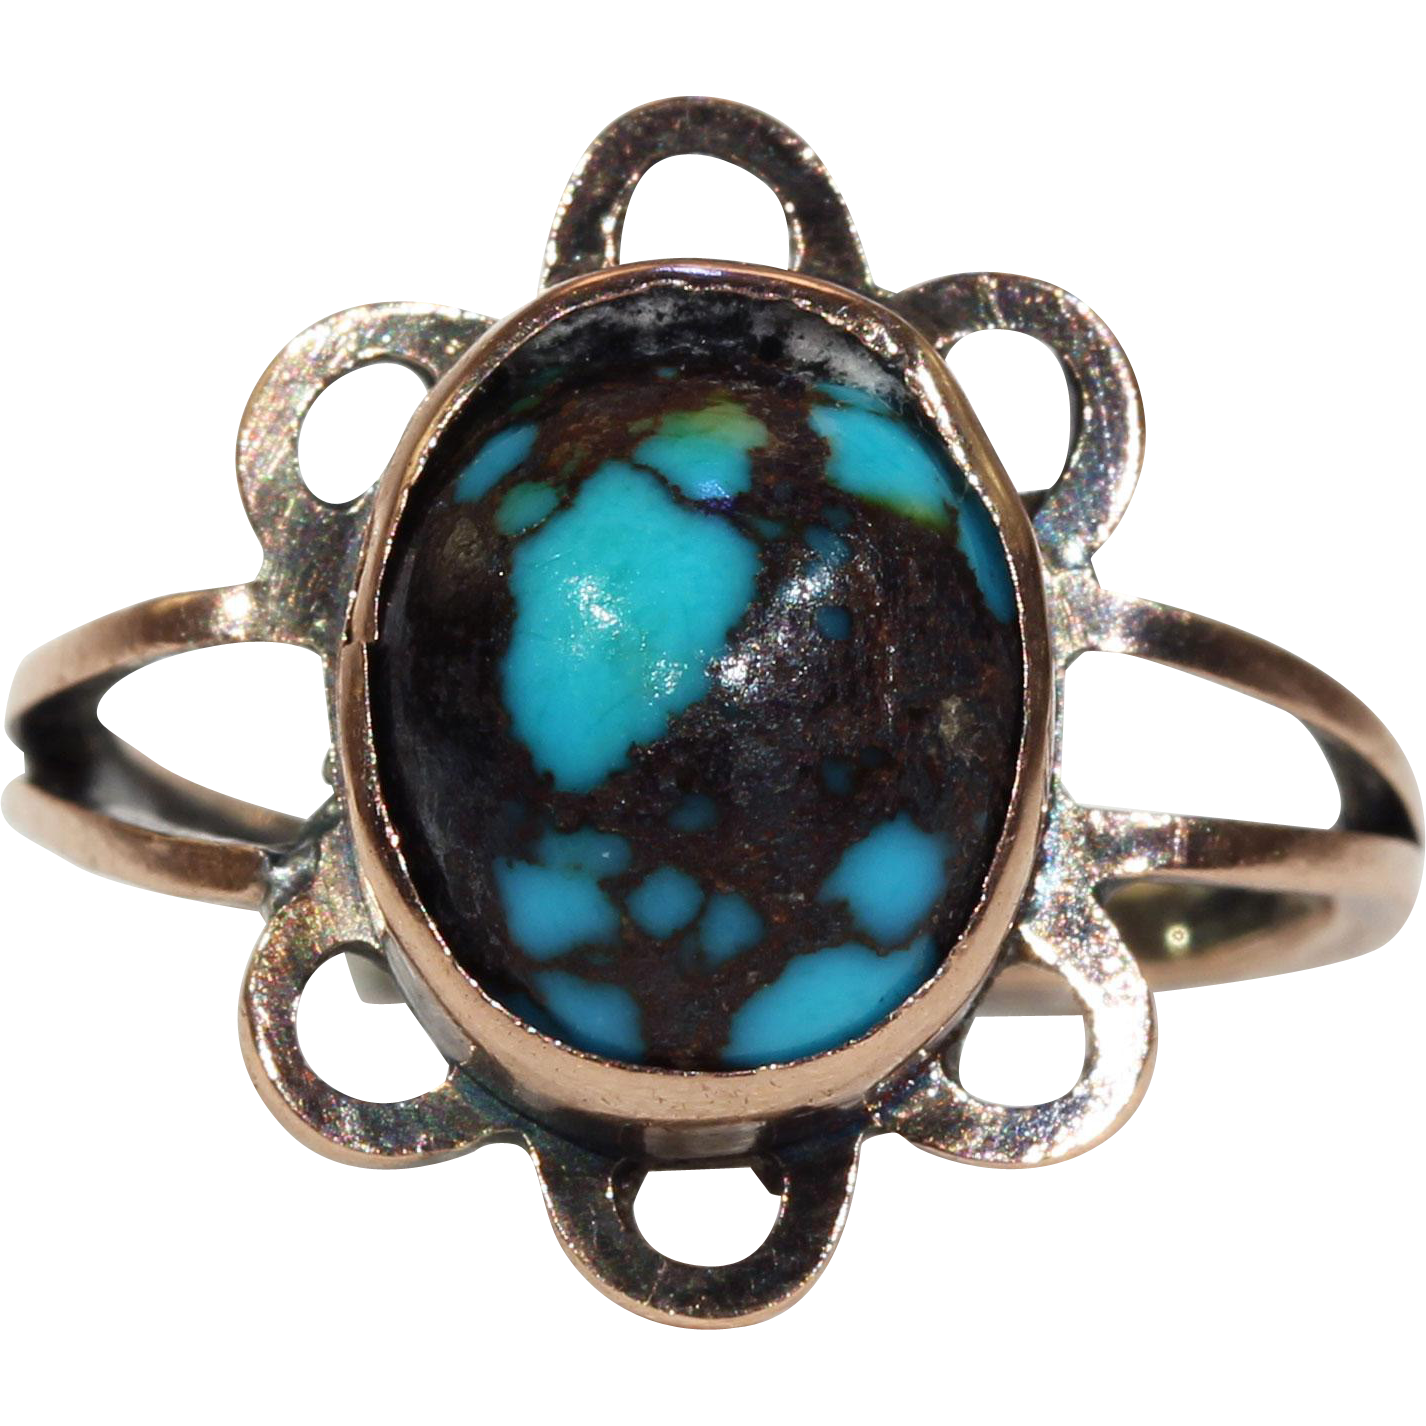 Antique Arts & Crafts Gold Turquoise Ring